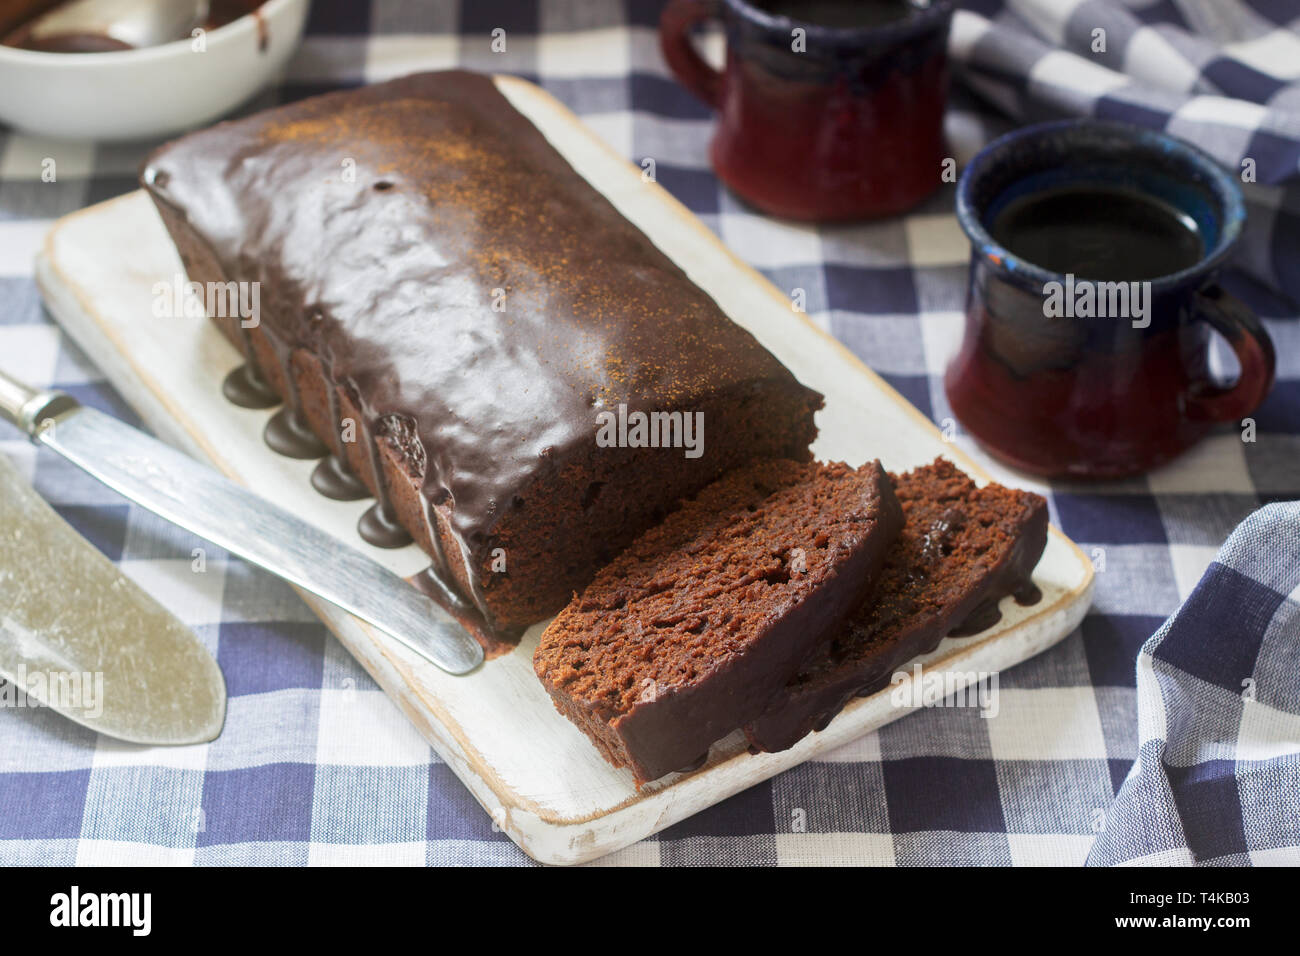 Vegan Mexican Chocolate Cake With Chili Cinnamon And Chocolate Icing Served With Coffee Selective Focus Stock Photo Alamy